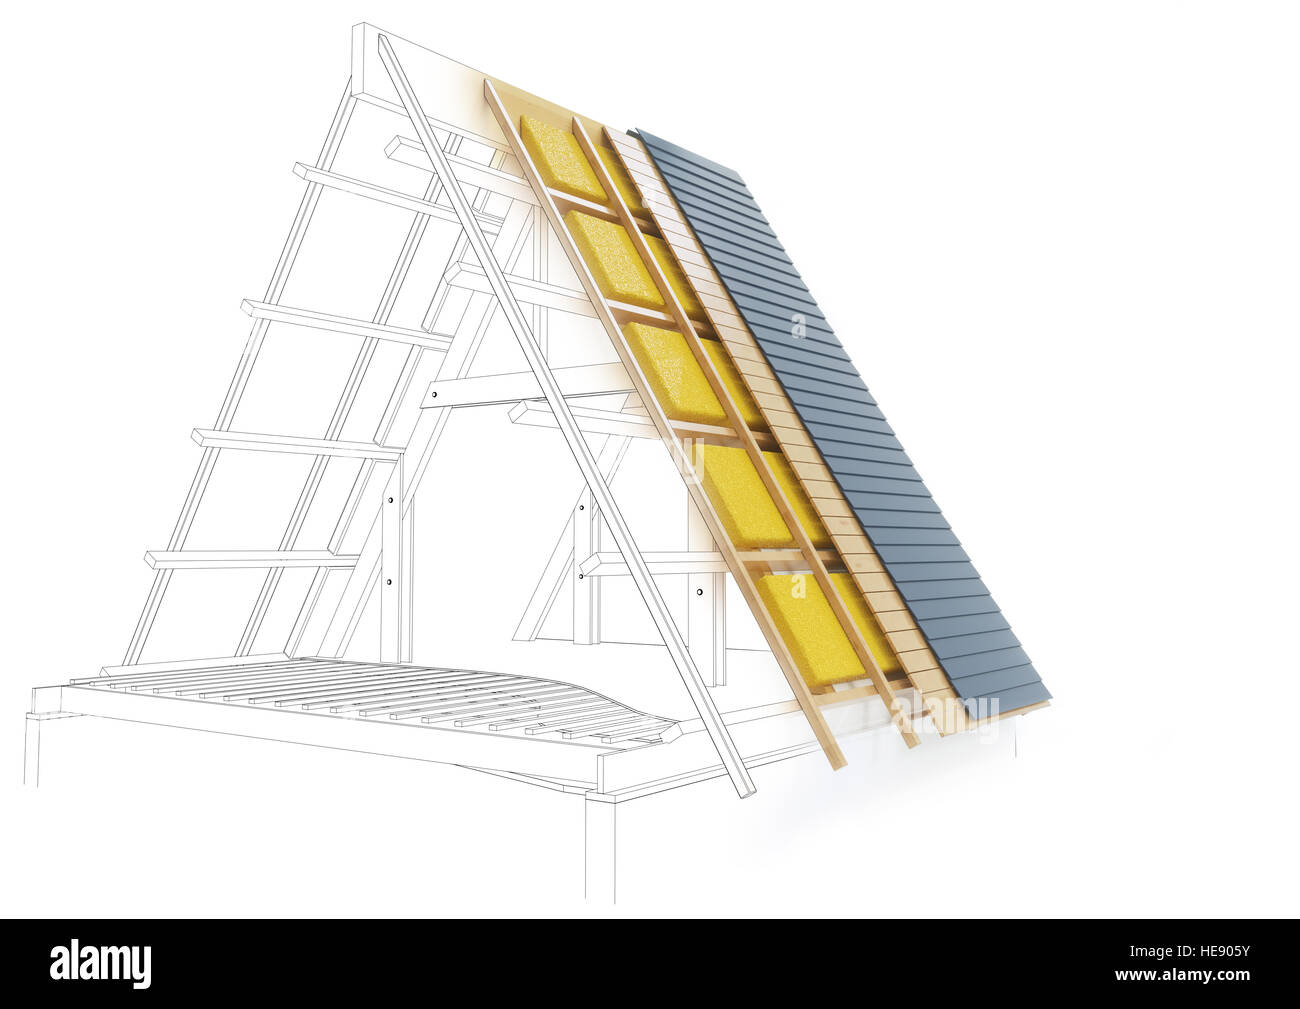 Design drawing of a roof with technical details - 3D rendering Stock Photo